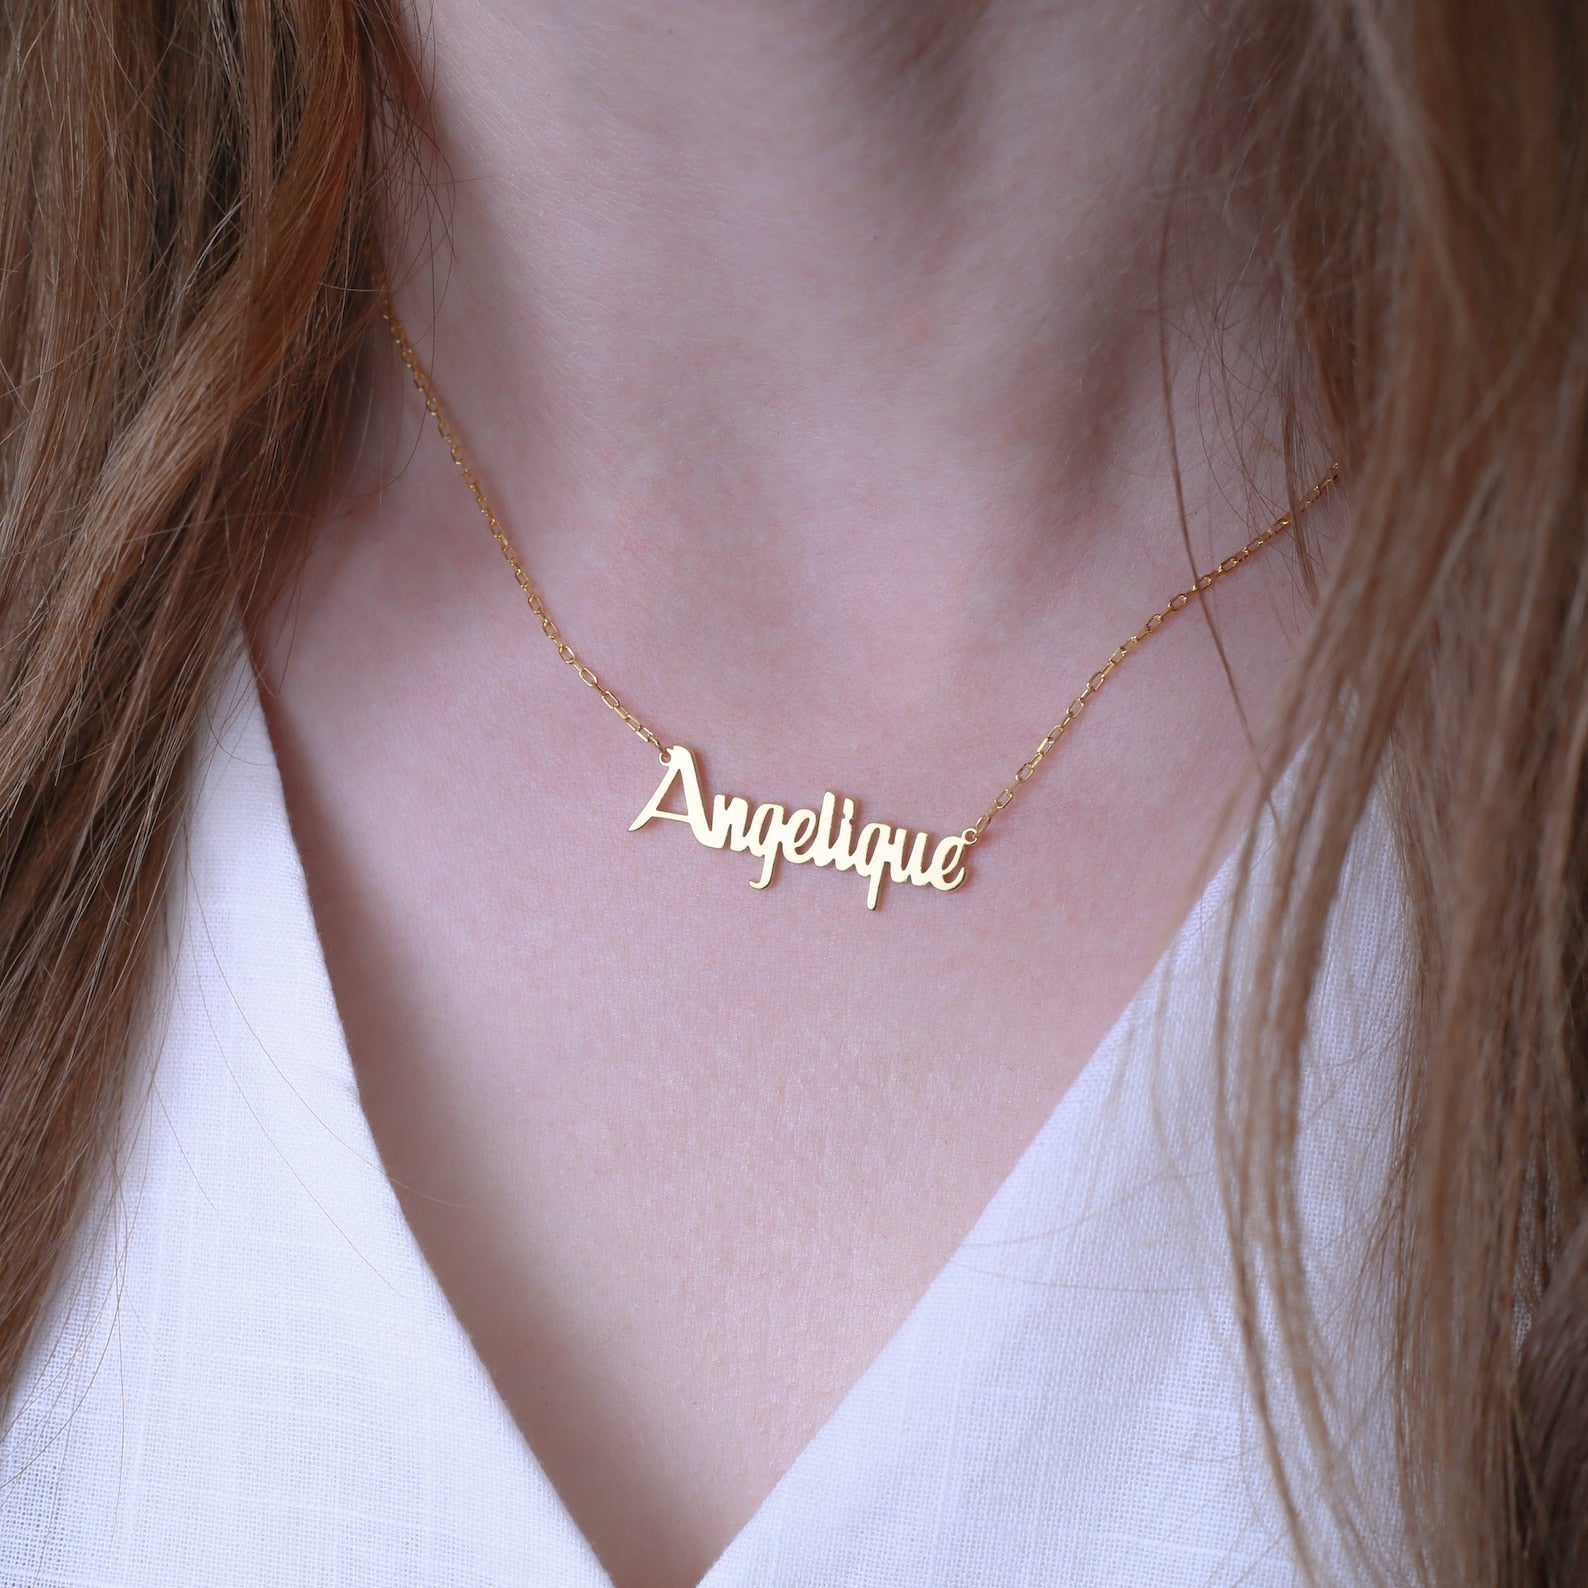 Name Necklace in Sterling Silver - Boltiesd™